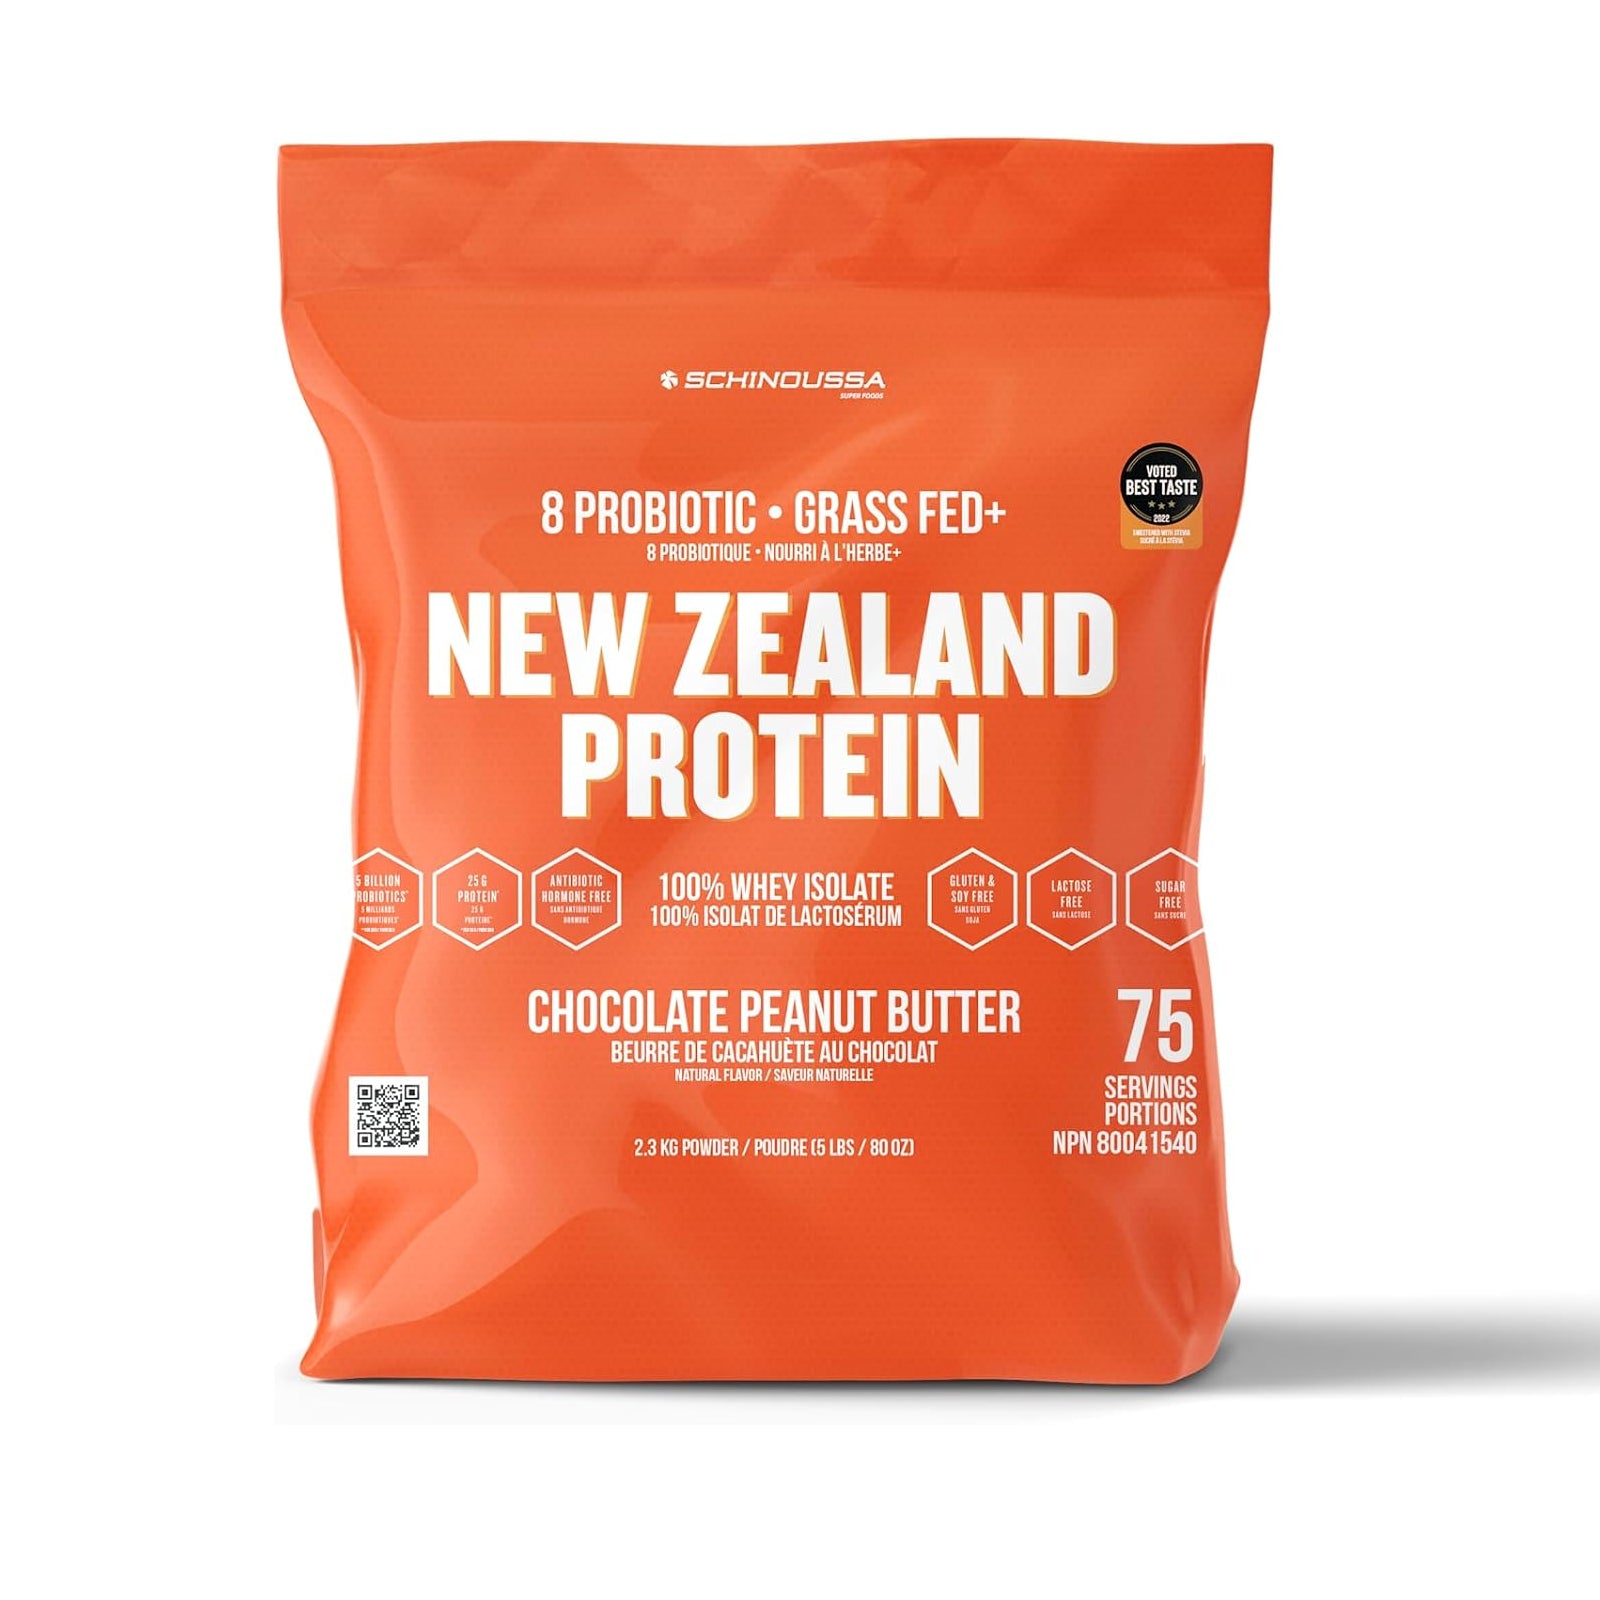 Schinoussa Probiotic New Zealand Whey Isolate Protein Grass-Fed Peanut Butter Chocolate / 2.3kg